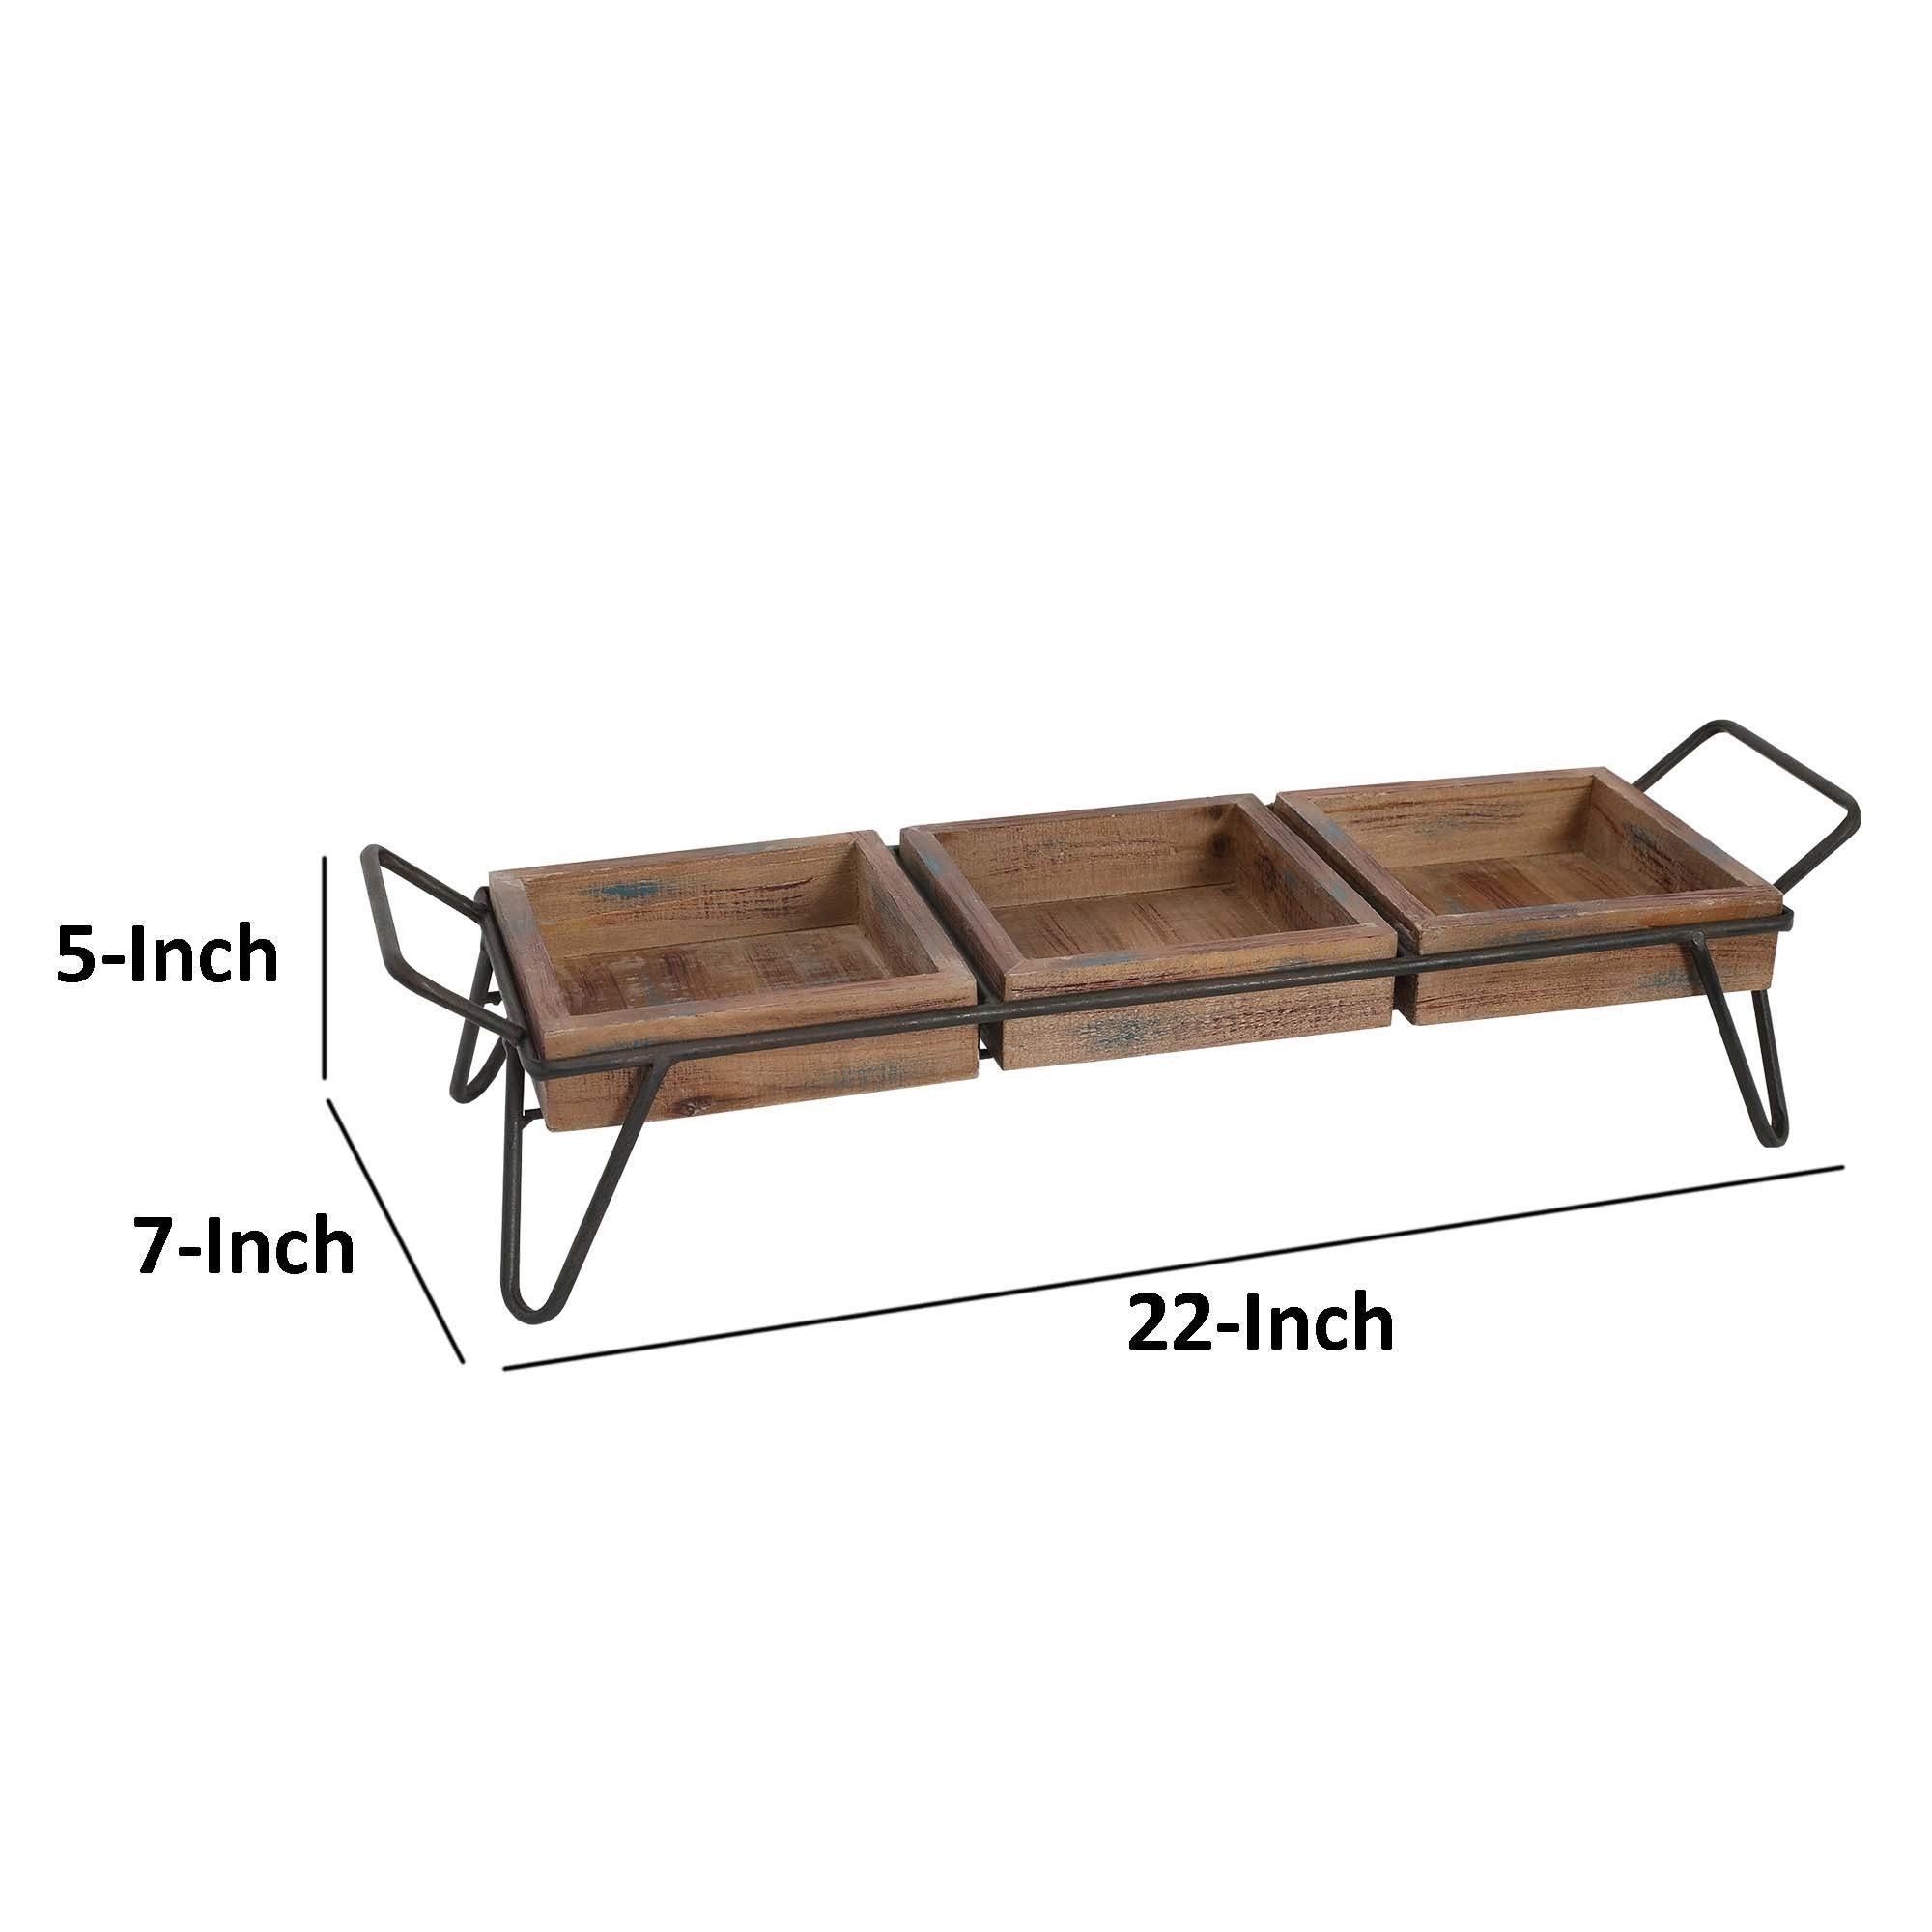 Artisinal Wood Serving Tray, 3 Seperate Sections and Metal Frame, Brown/ Black